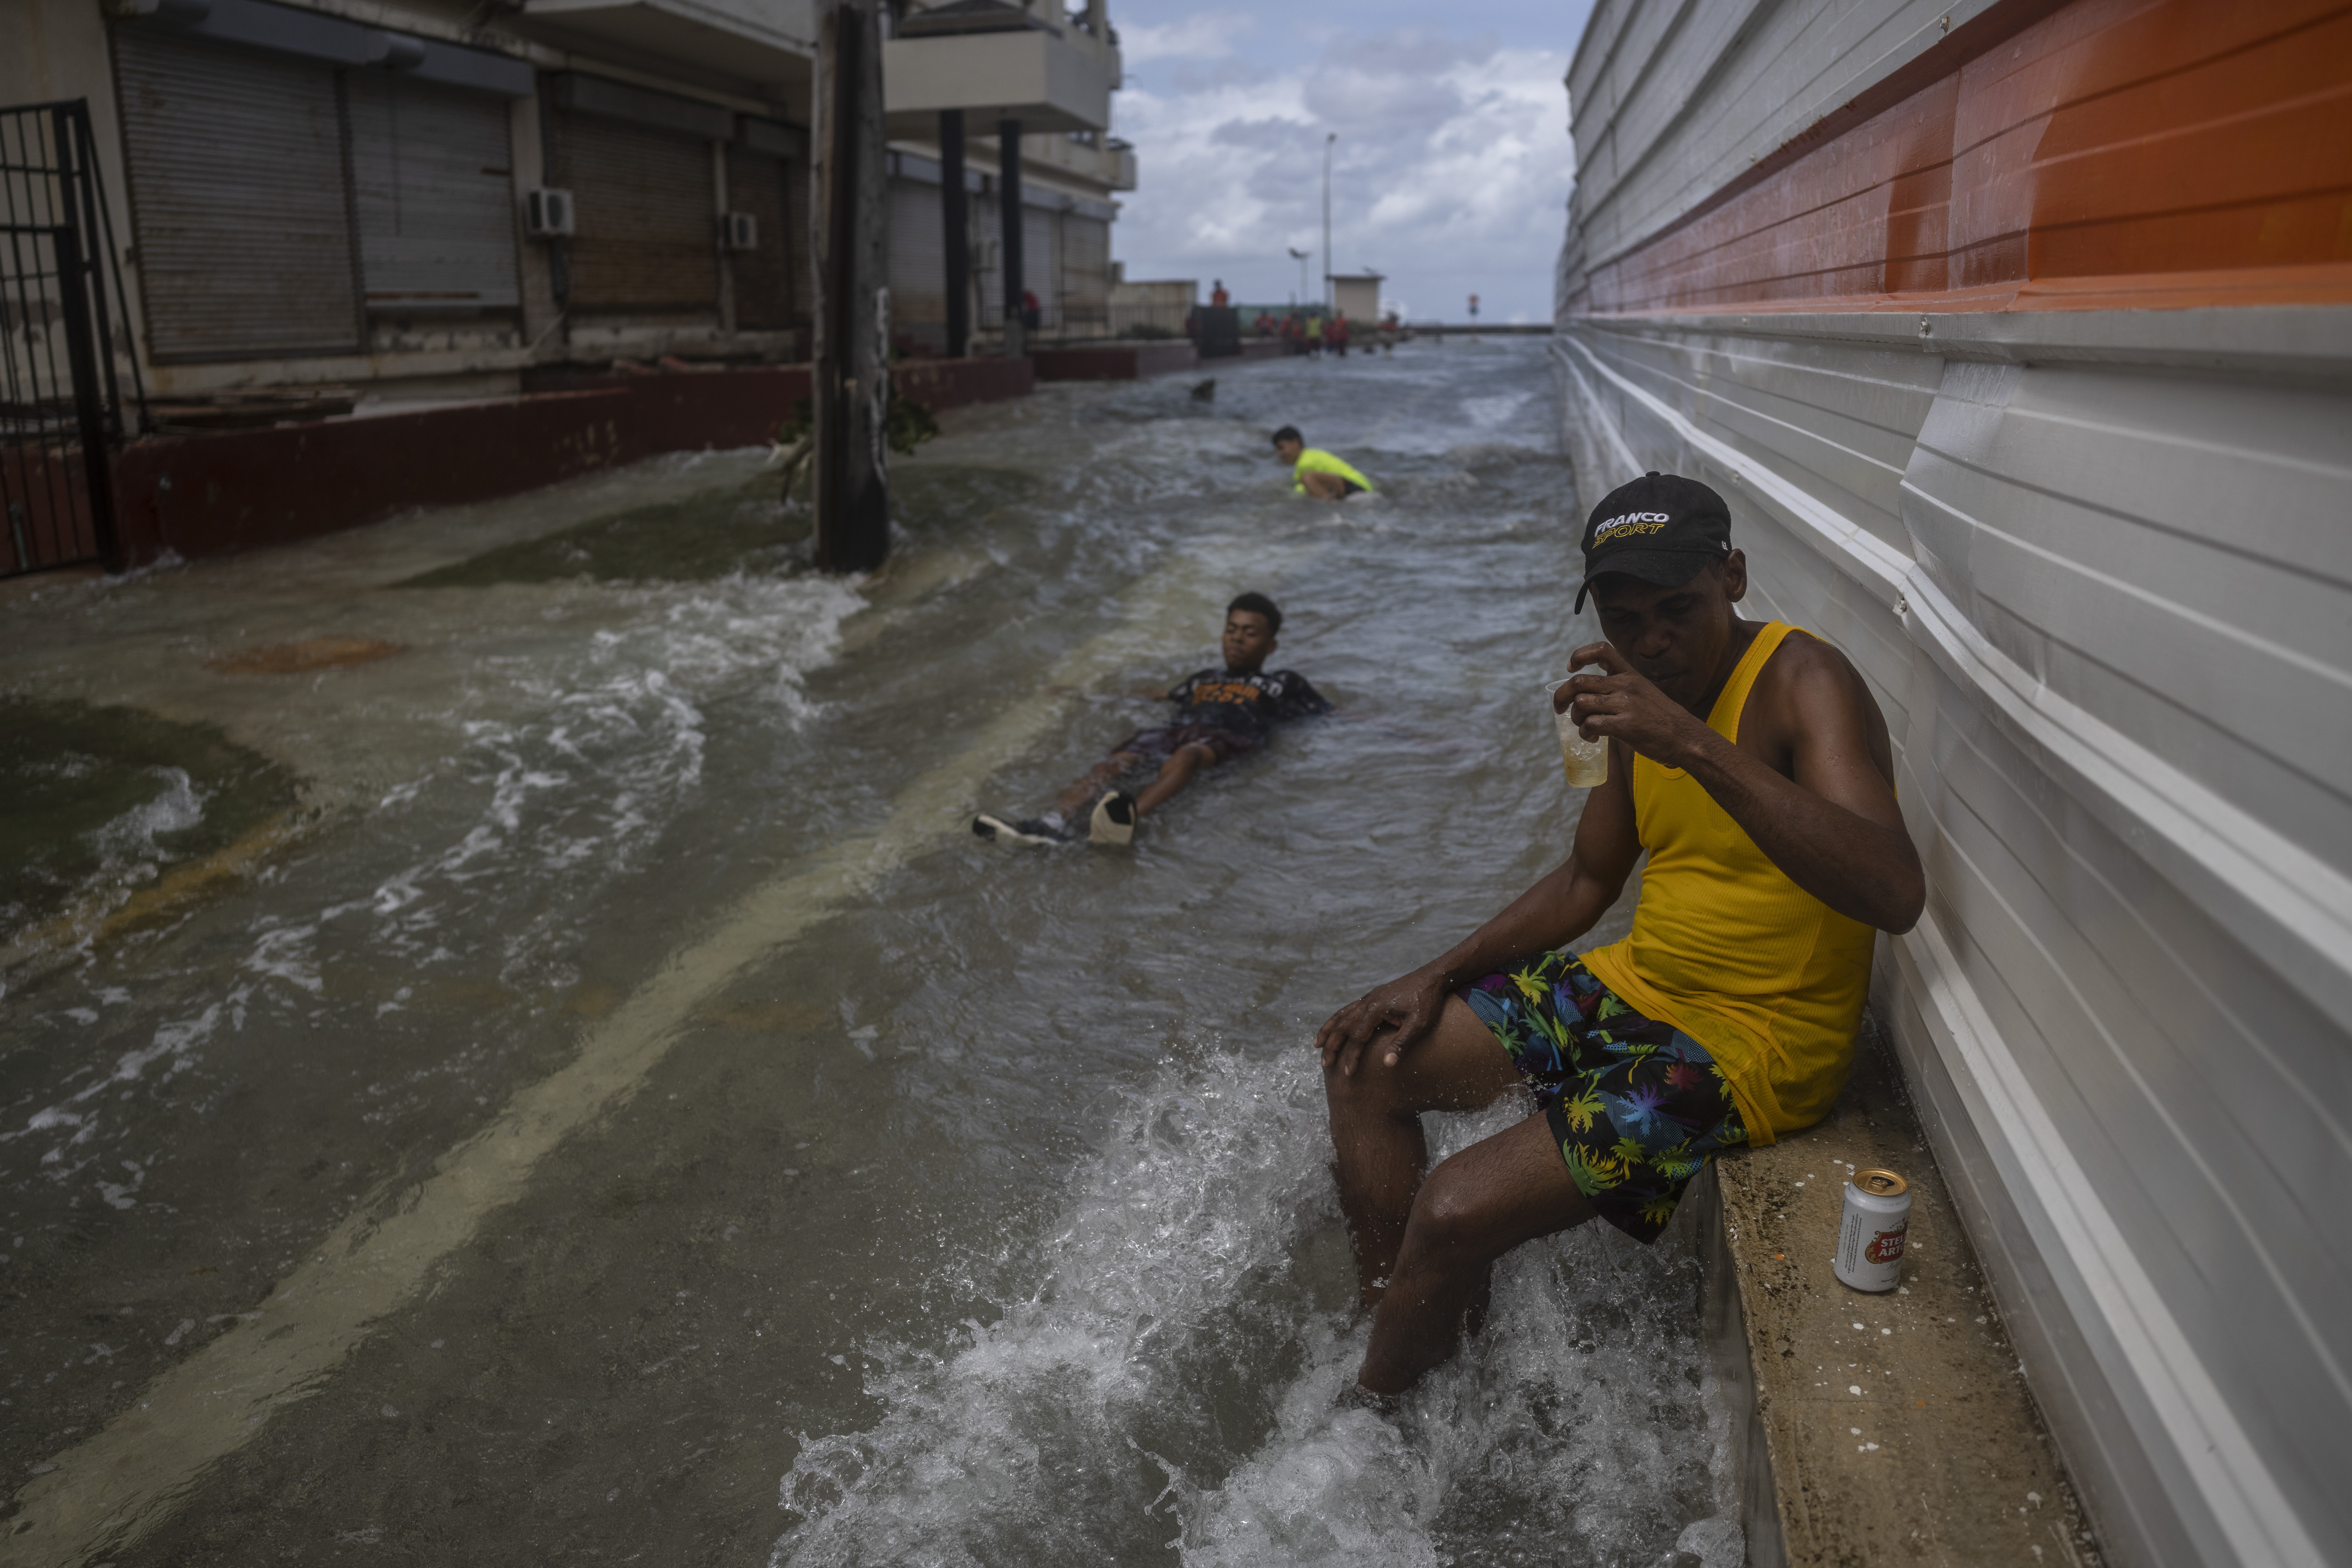 People play in a street flooded by the waves that break on the Malecon in the aftermath of Hurricane Ian in Havana, Cuba, Thursday, Sept. 29, 2022. (AP Photo/Ramon Espinosa)